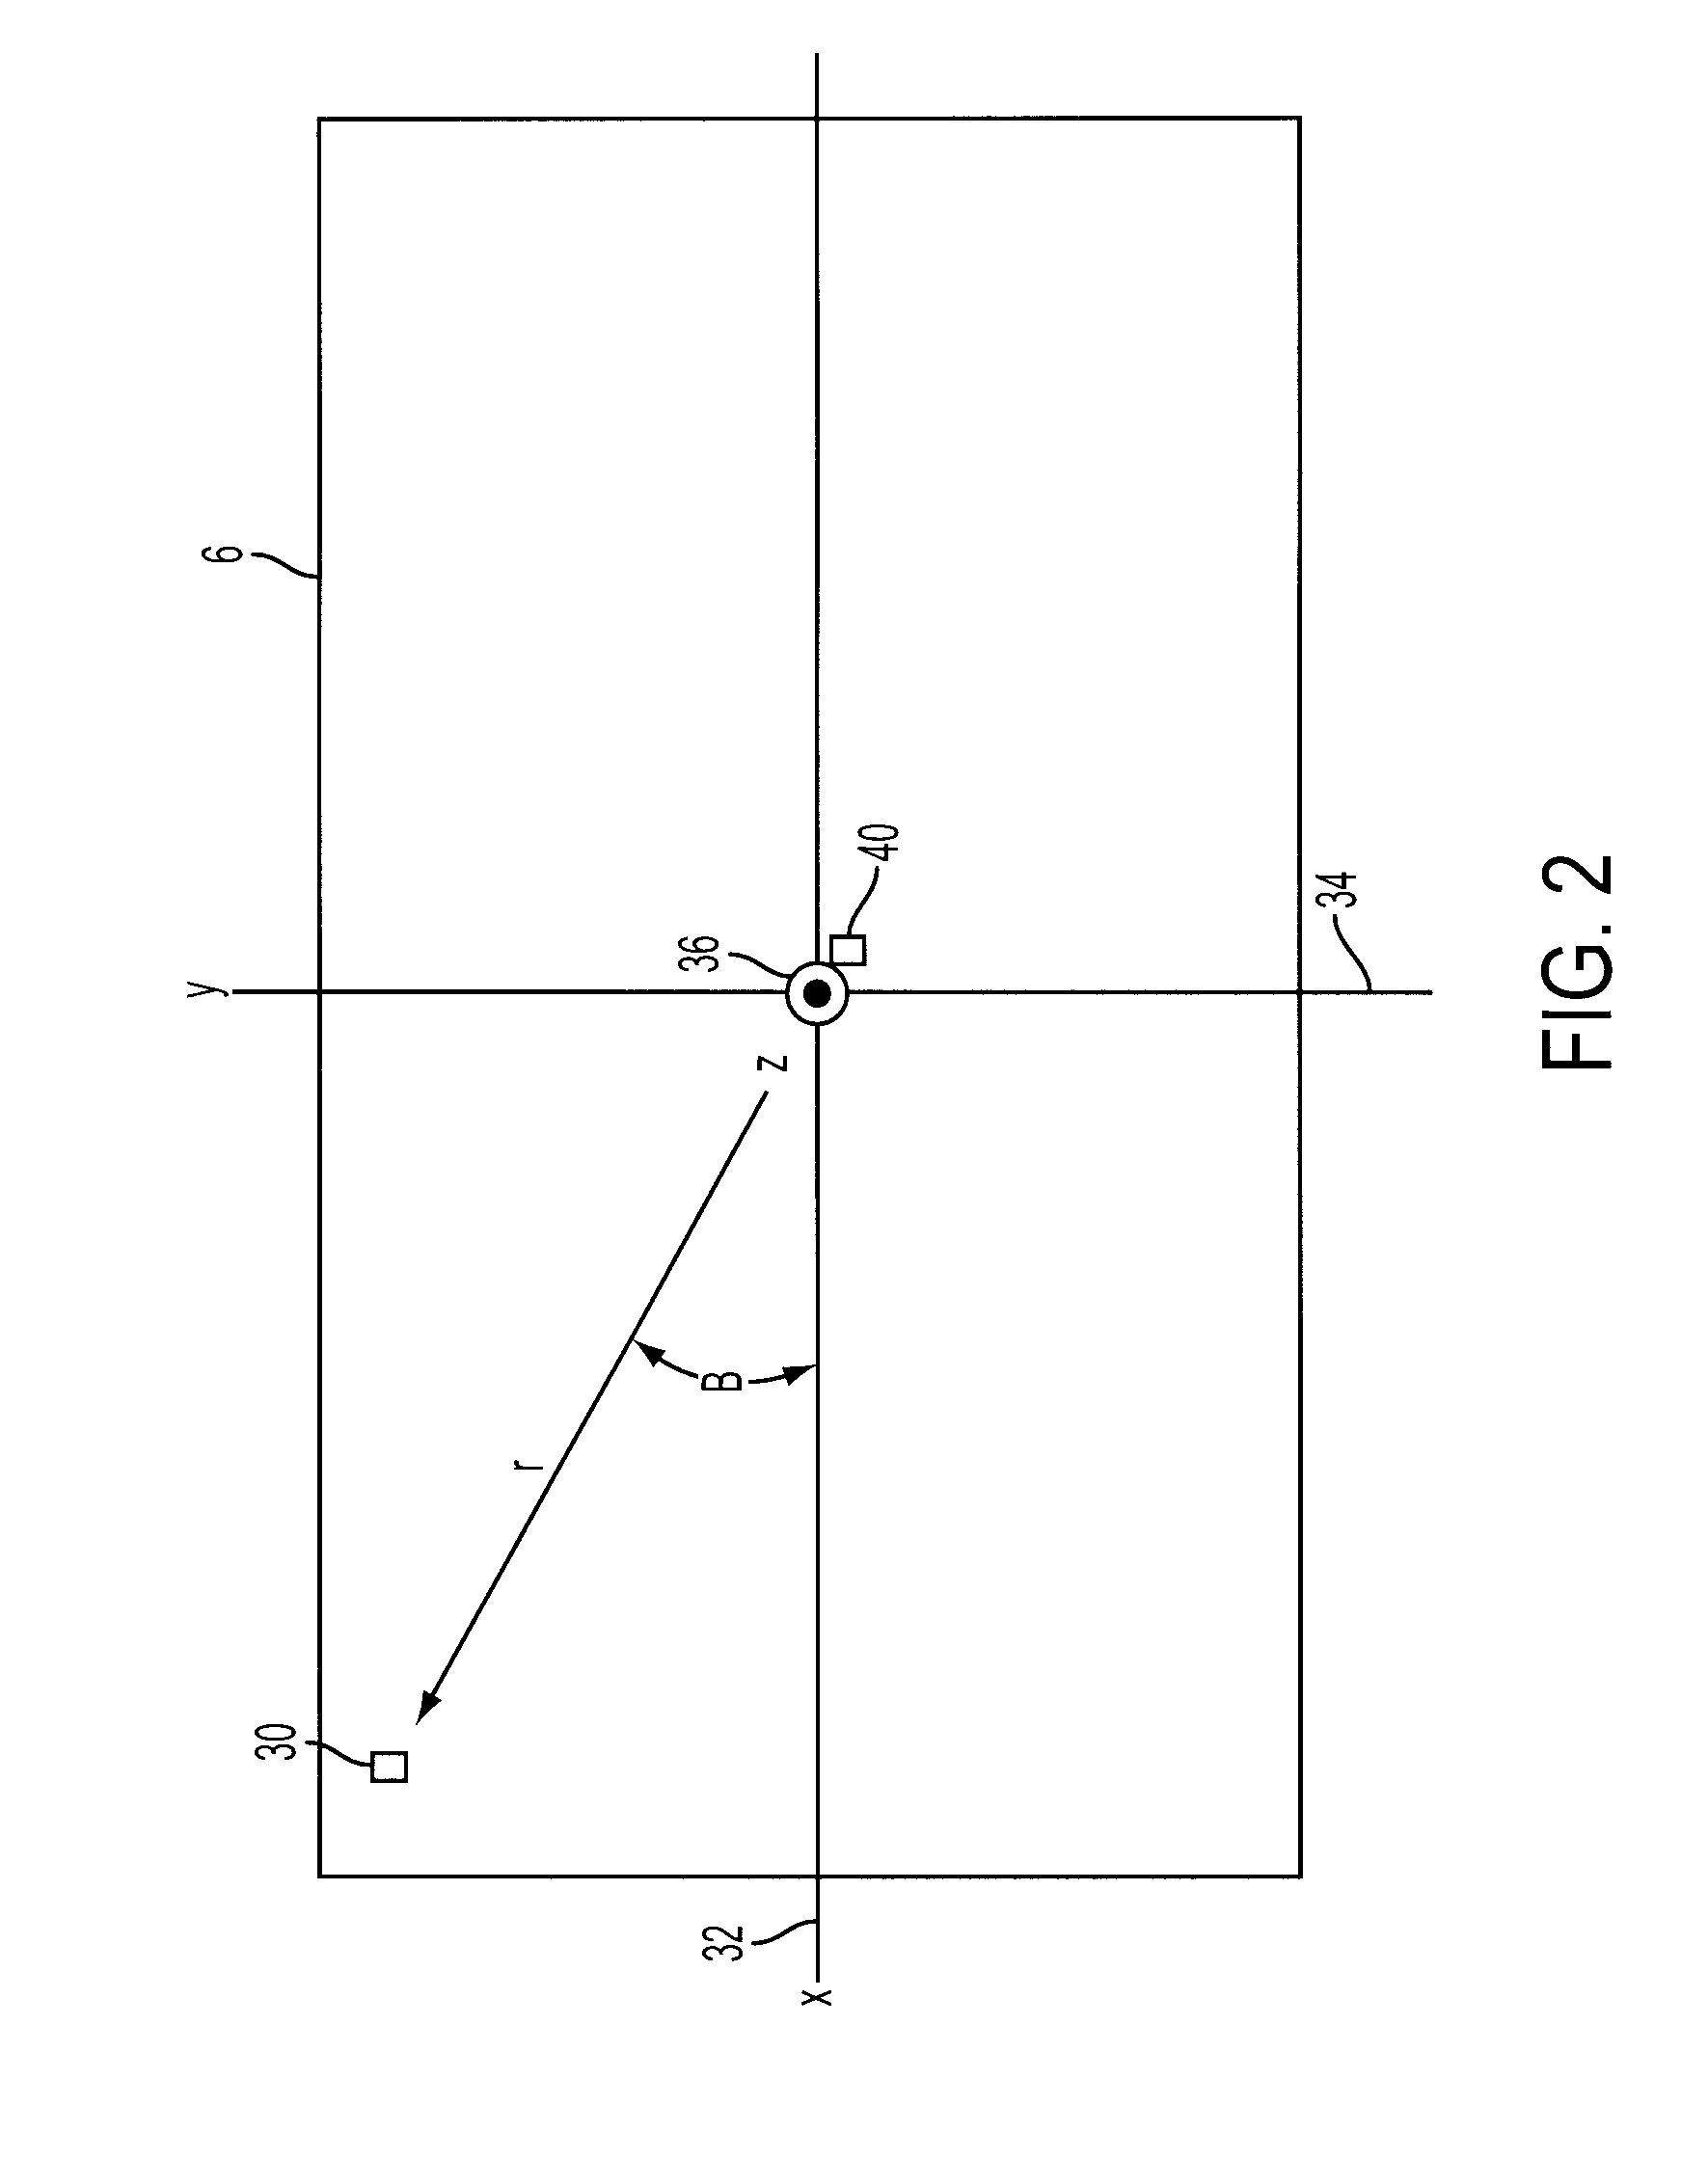 Inclinometer measurement system and method providing correction for movement induced acceleration errors